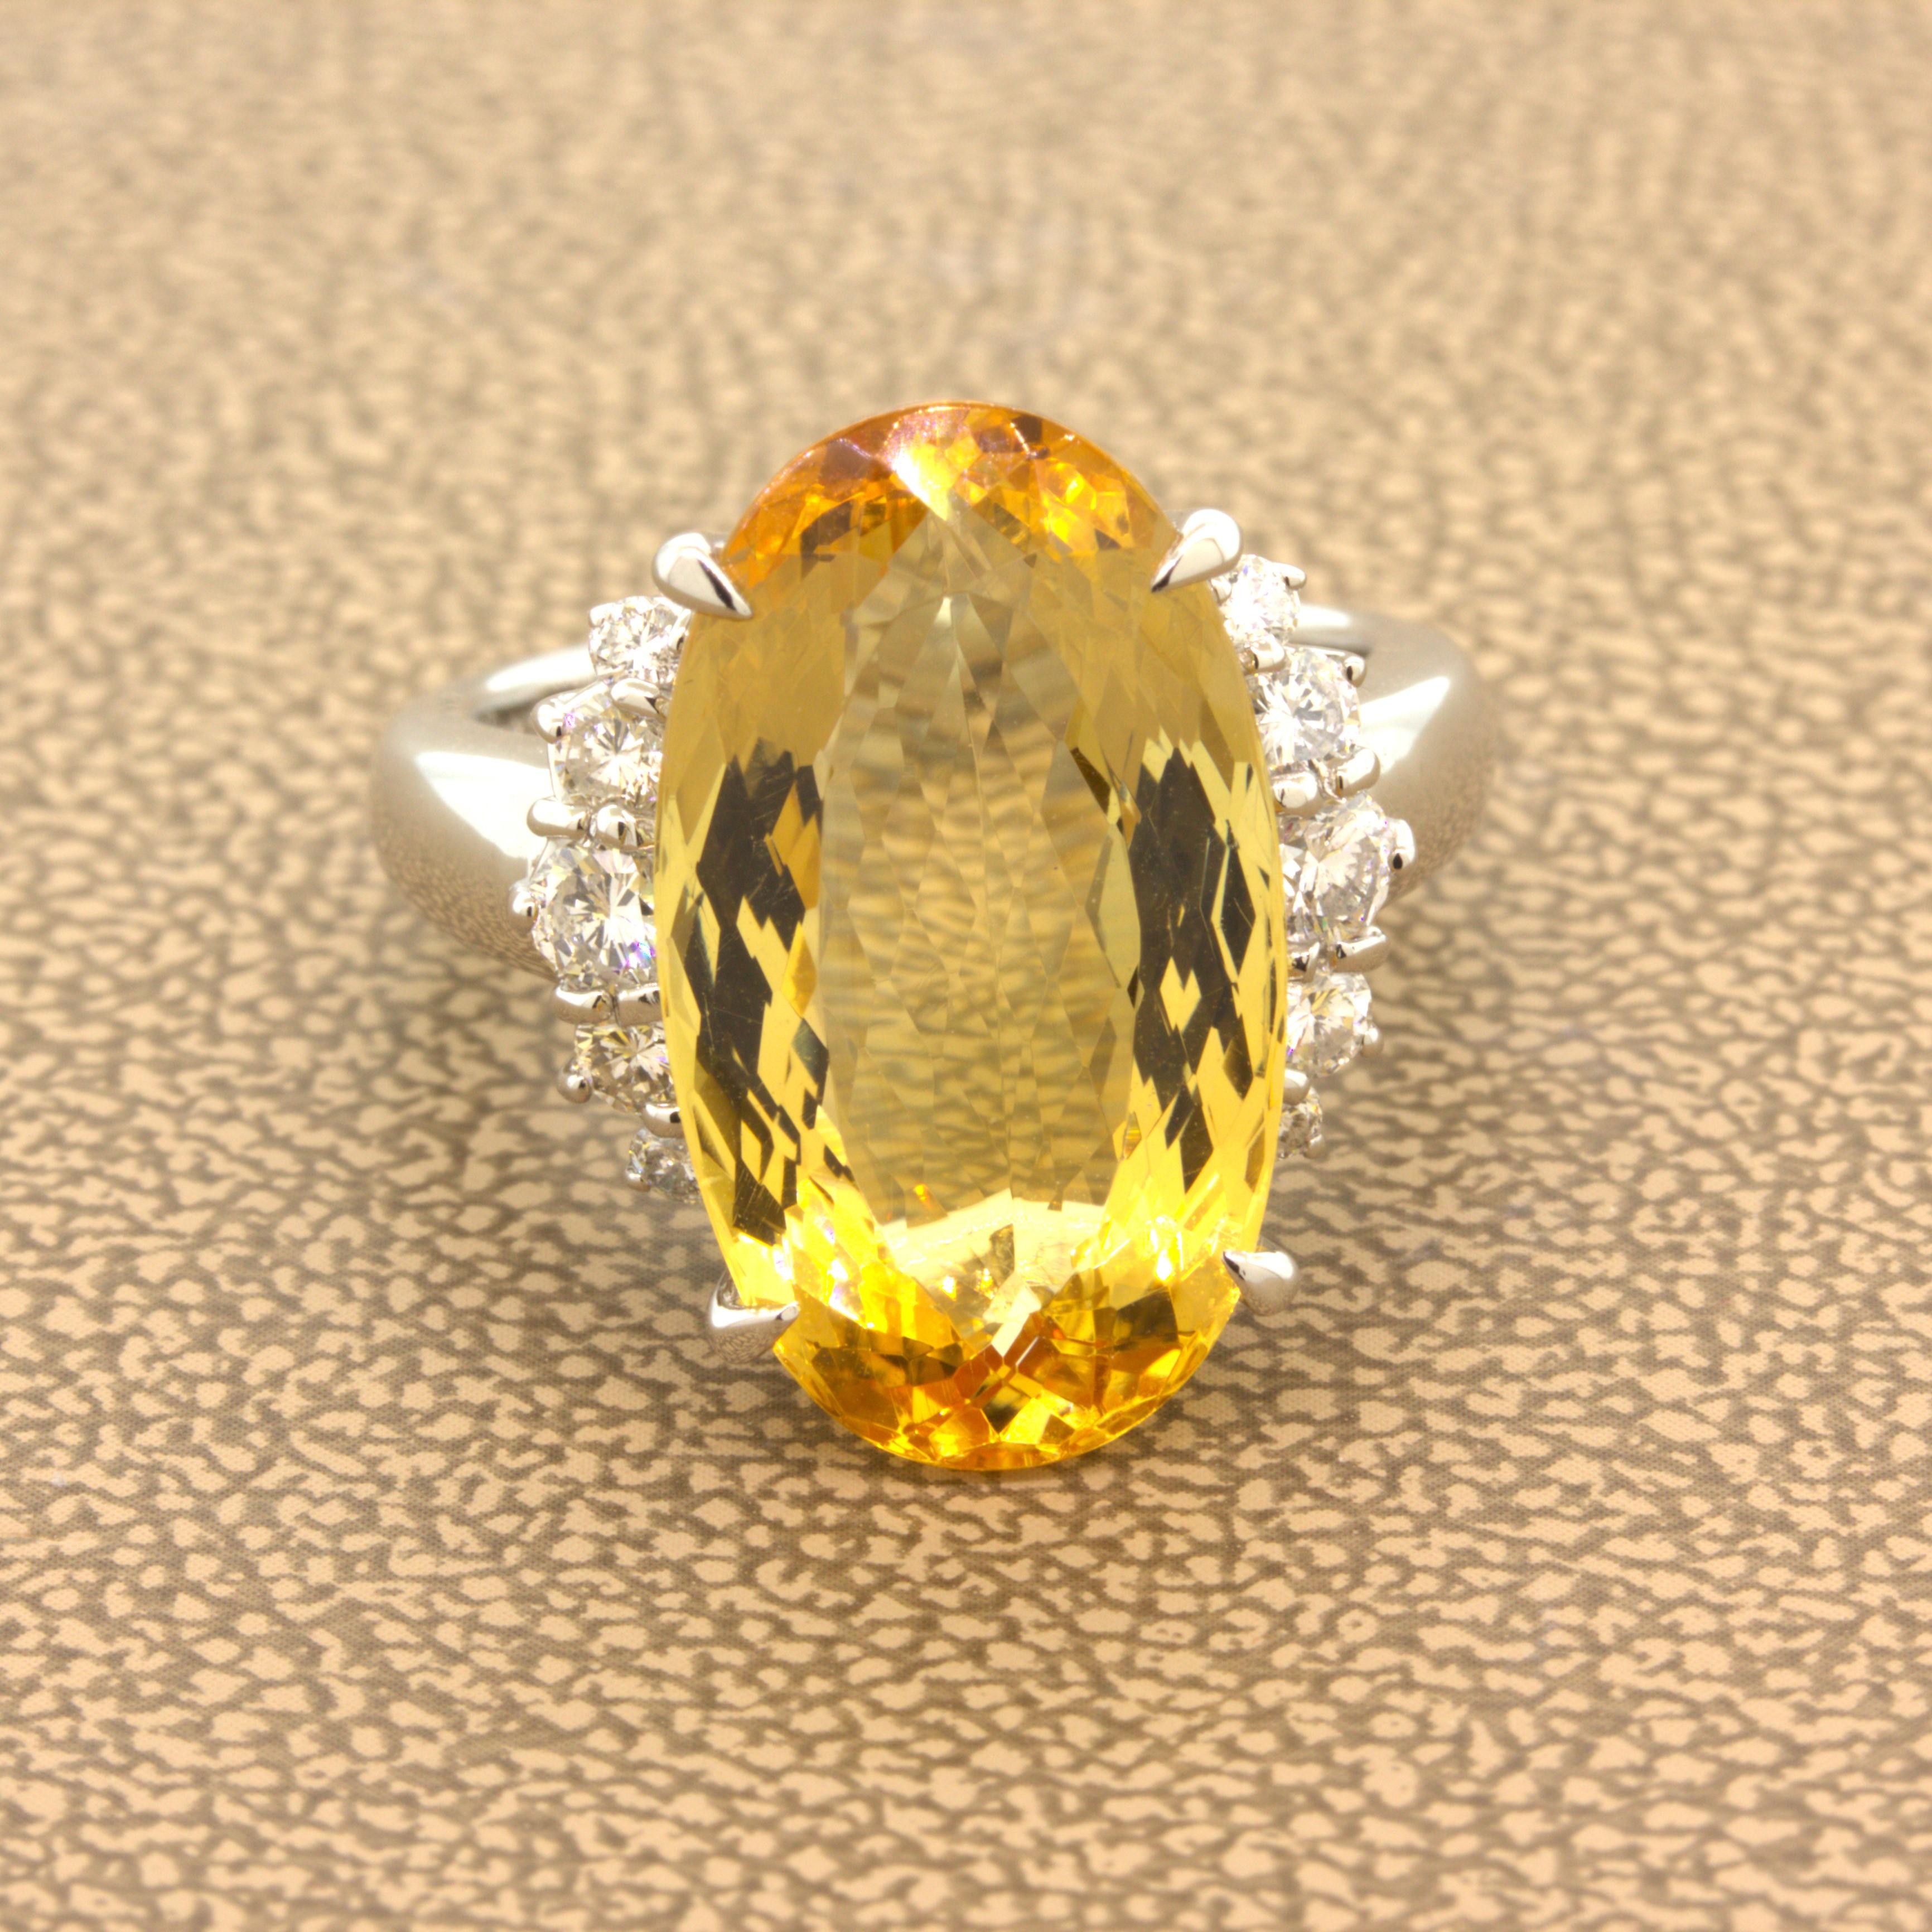 A sleek and elegant ring featuring a fine 12 carat imperial topaz! It has a lovely long oval shape along with a rich and vibrant golden orange-yellow color with excellent brilliance and light return. It is complemented by 10 round brilliant-cut